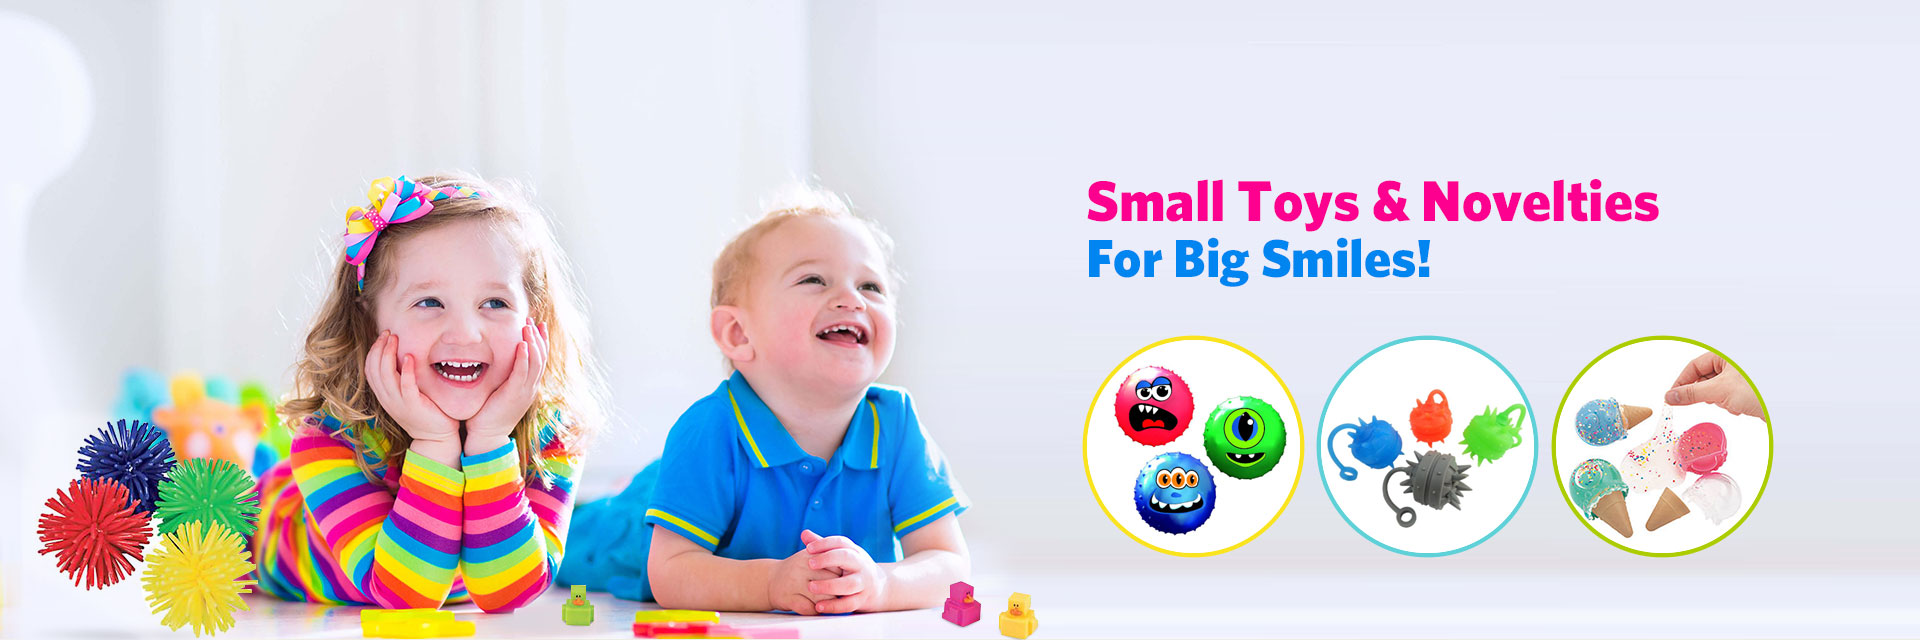 Small Toys, Novelties for Big Smiles!